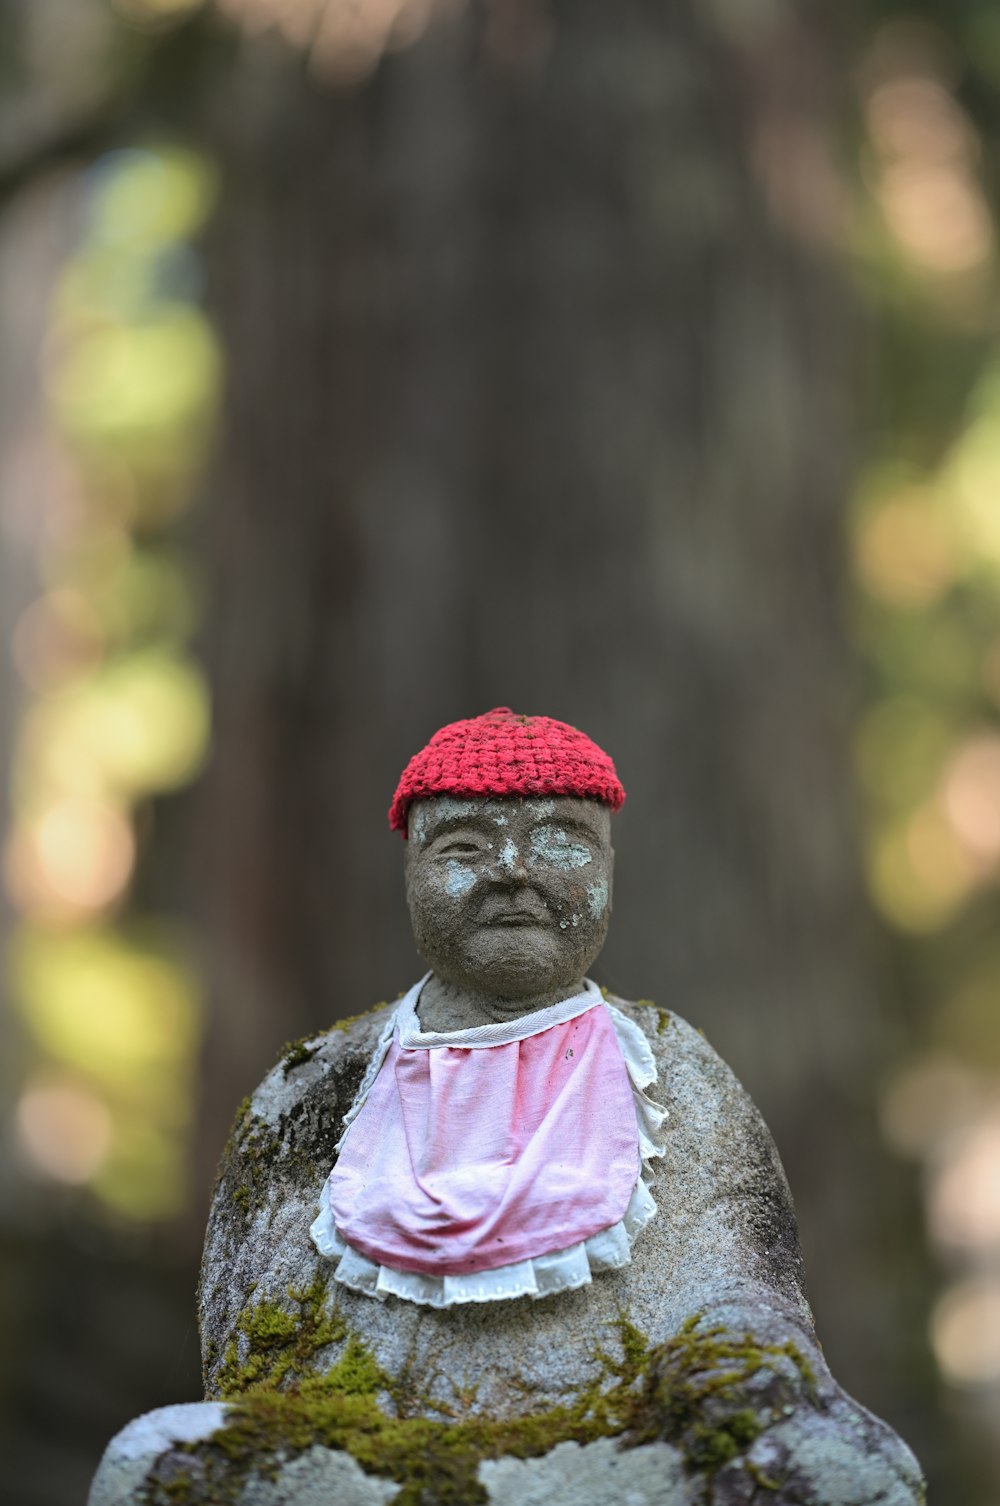 a statue of a man wearing a red hat